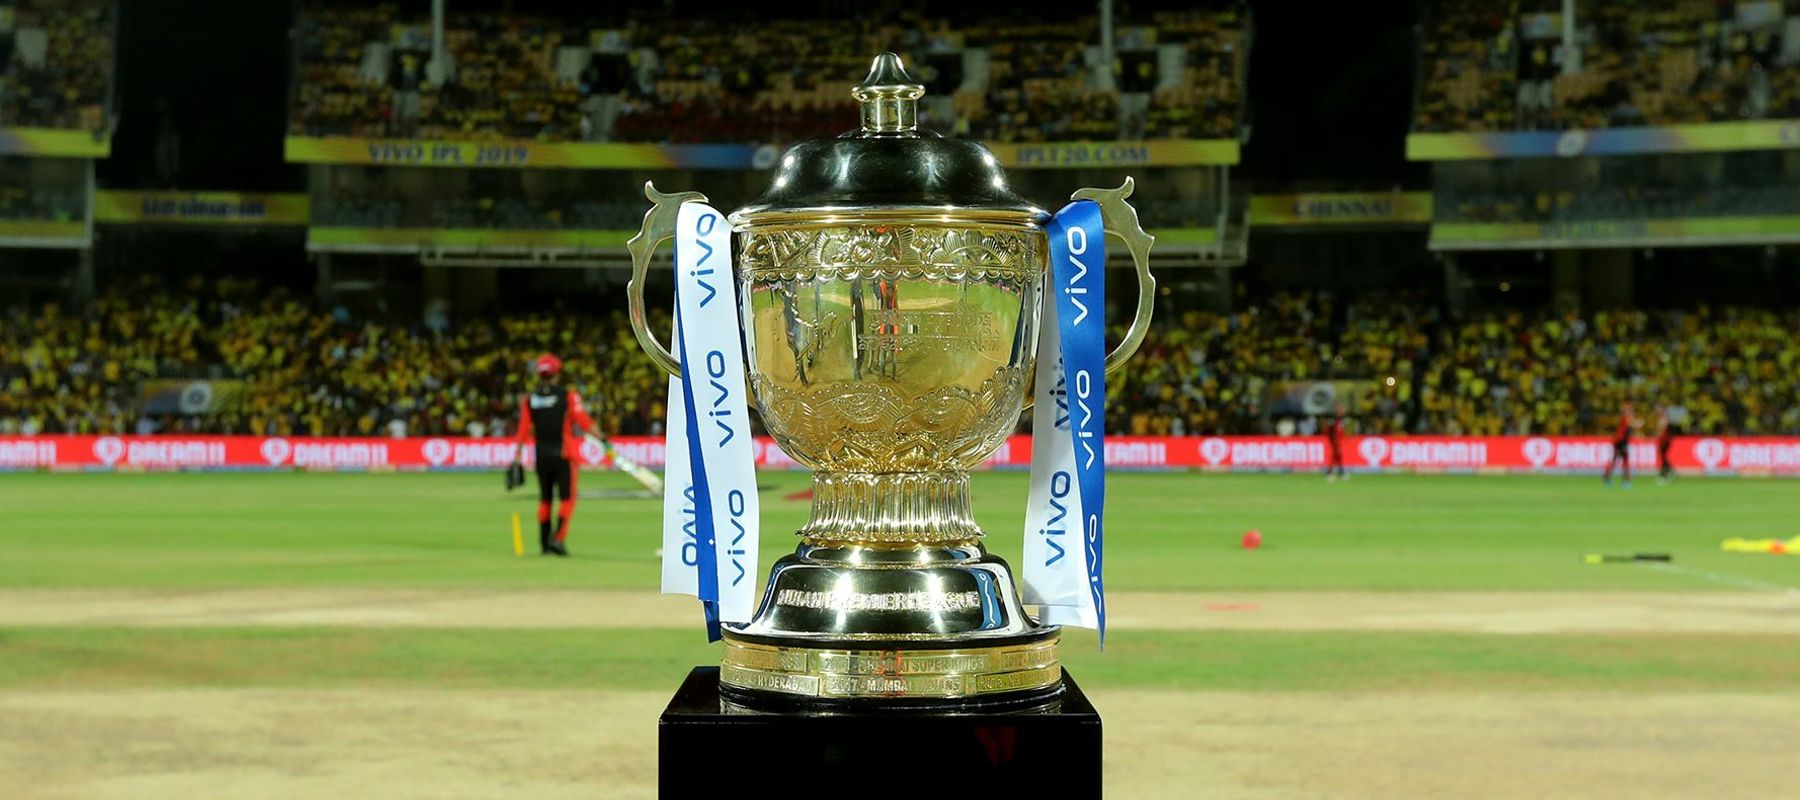 IPL and BCCI faces backlash over retaining Chinese sponsors for IPL 2020 